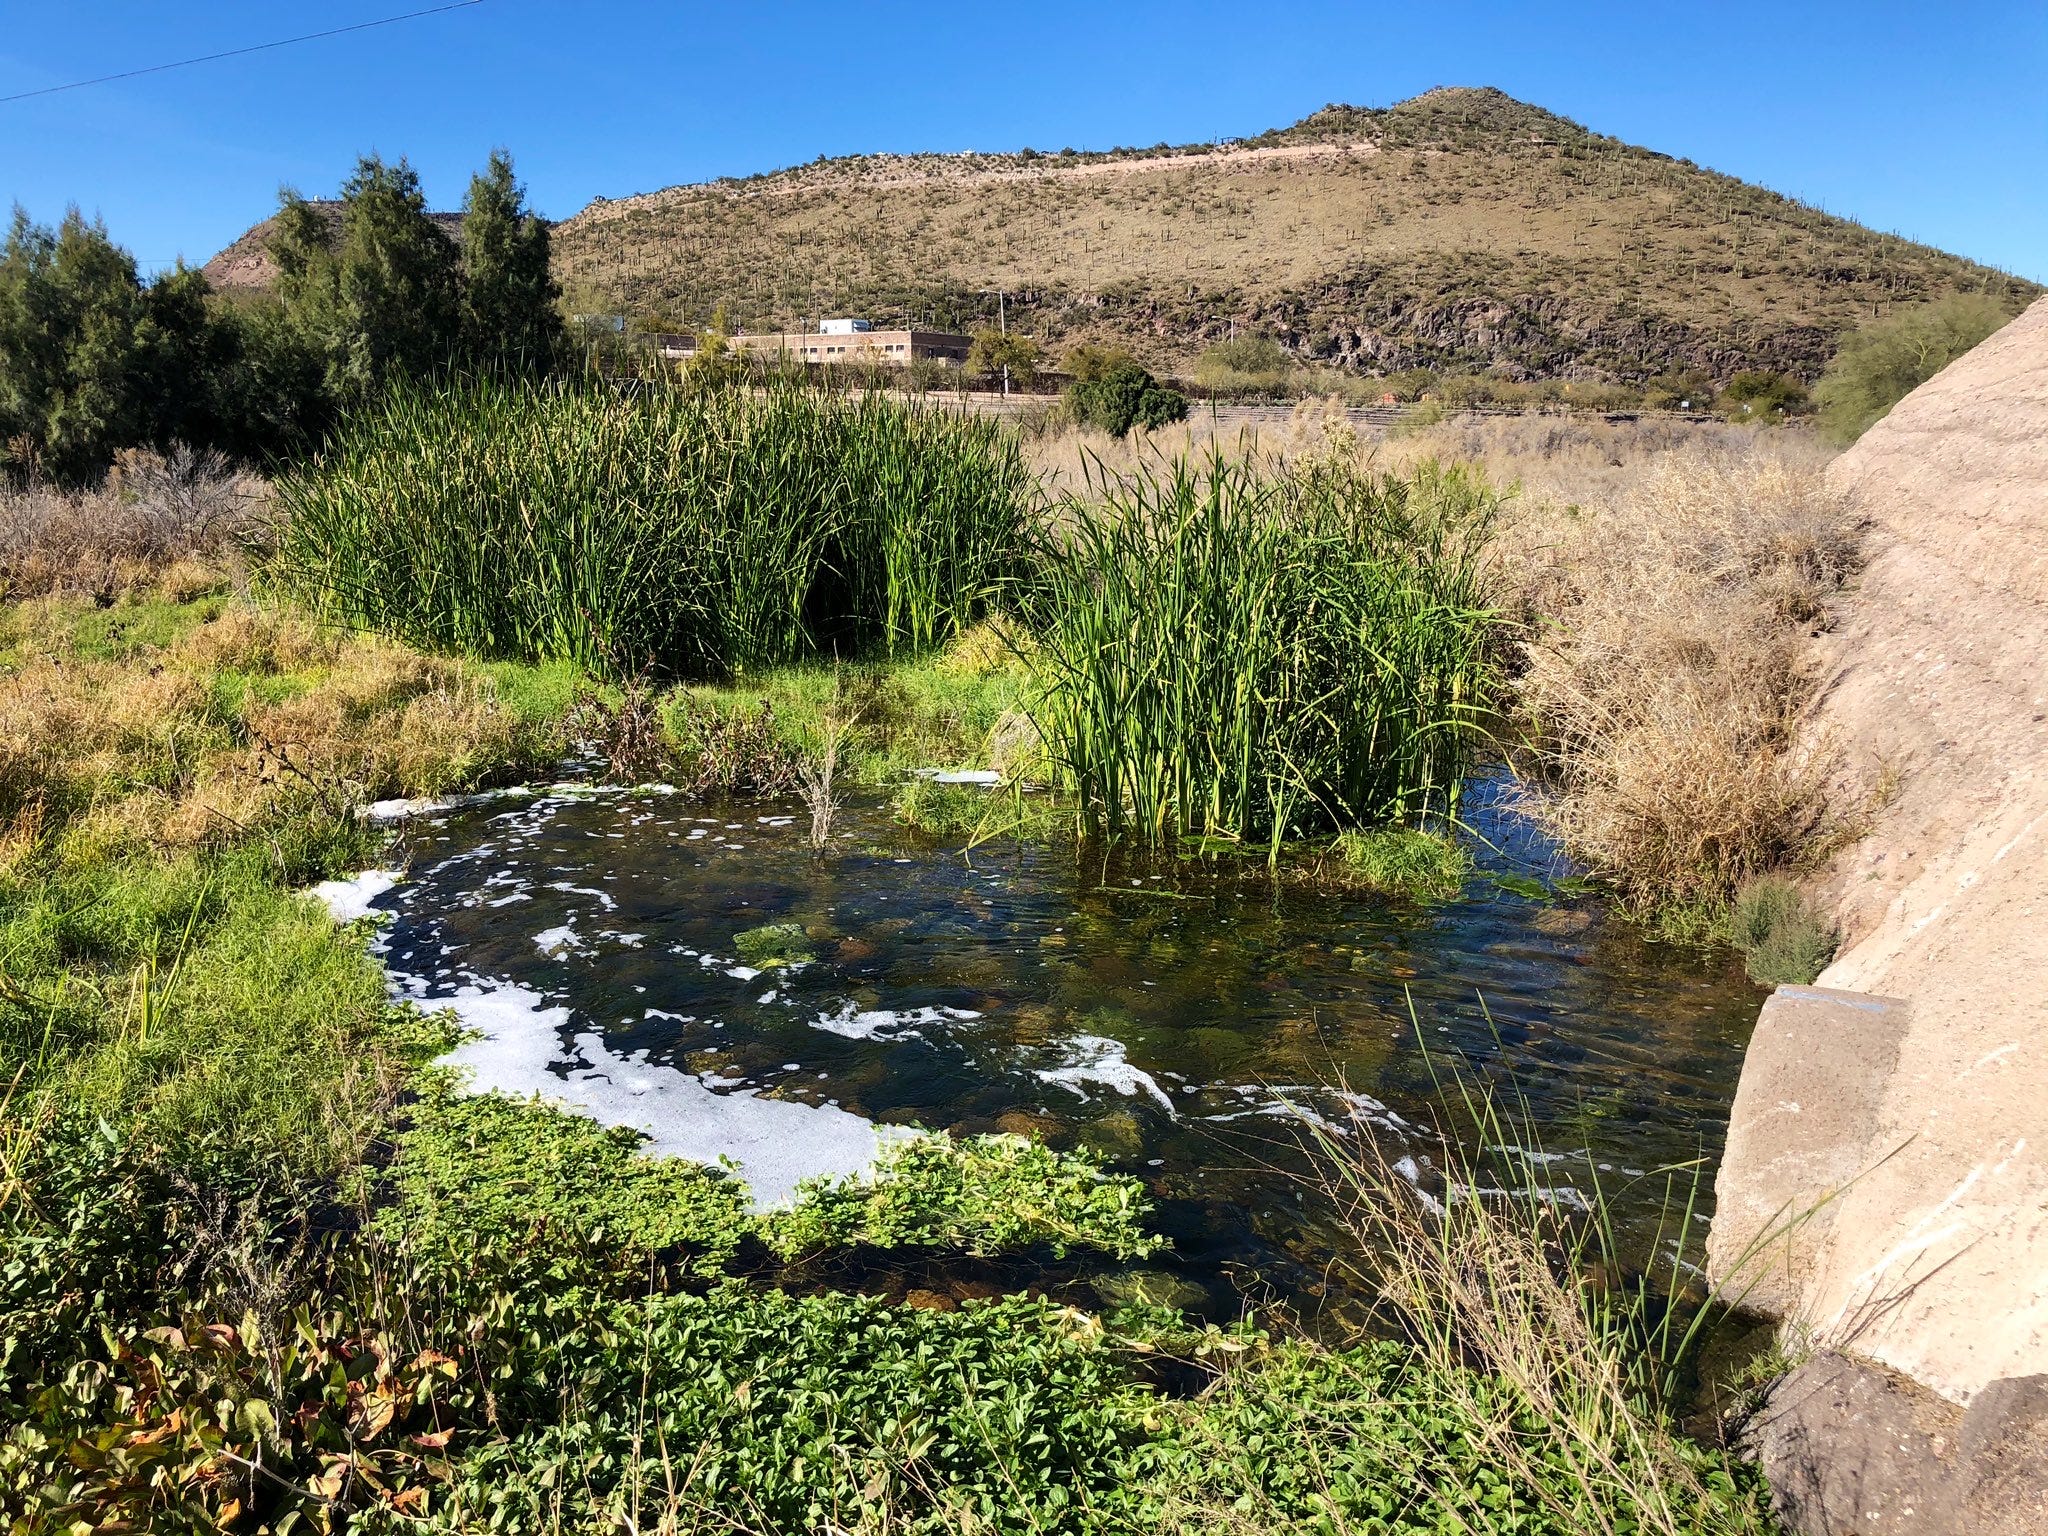 Treated wastewater flows from Tucson Water’s pipe into the Santa Cruz River channel in February 2020. The city’s Santa Cruz River Heritage Project has since 2019 been releasing reclaimed water into the river near downtown Tucson, and cattails have sprung up in the water.